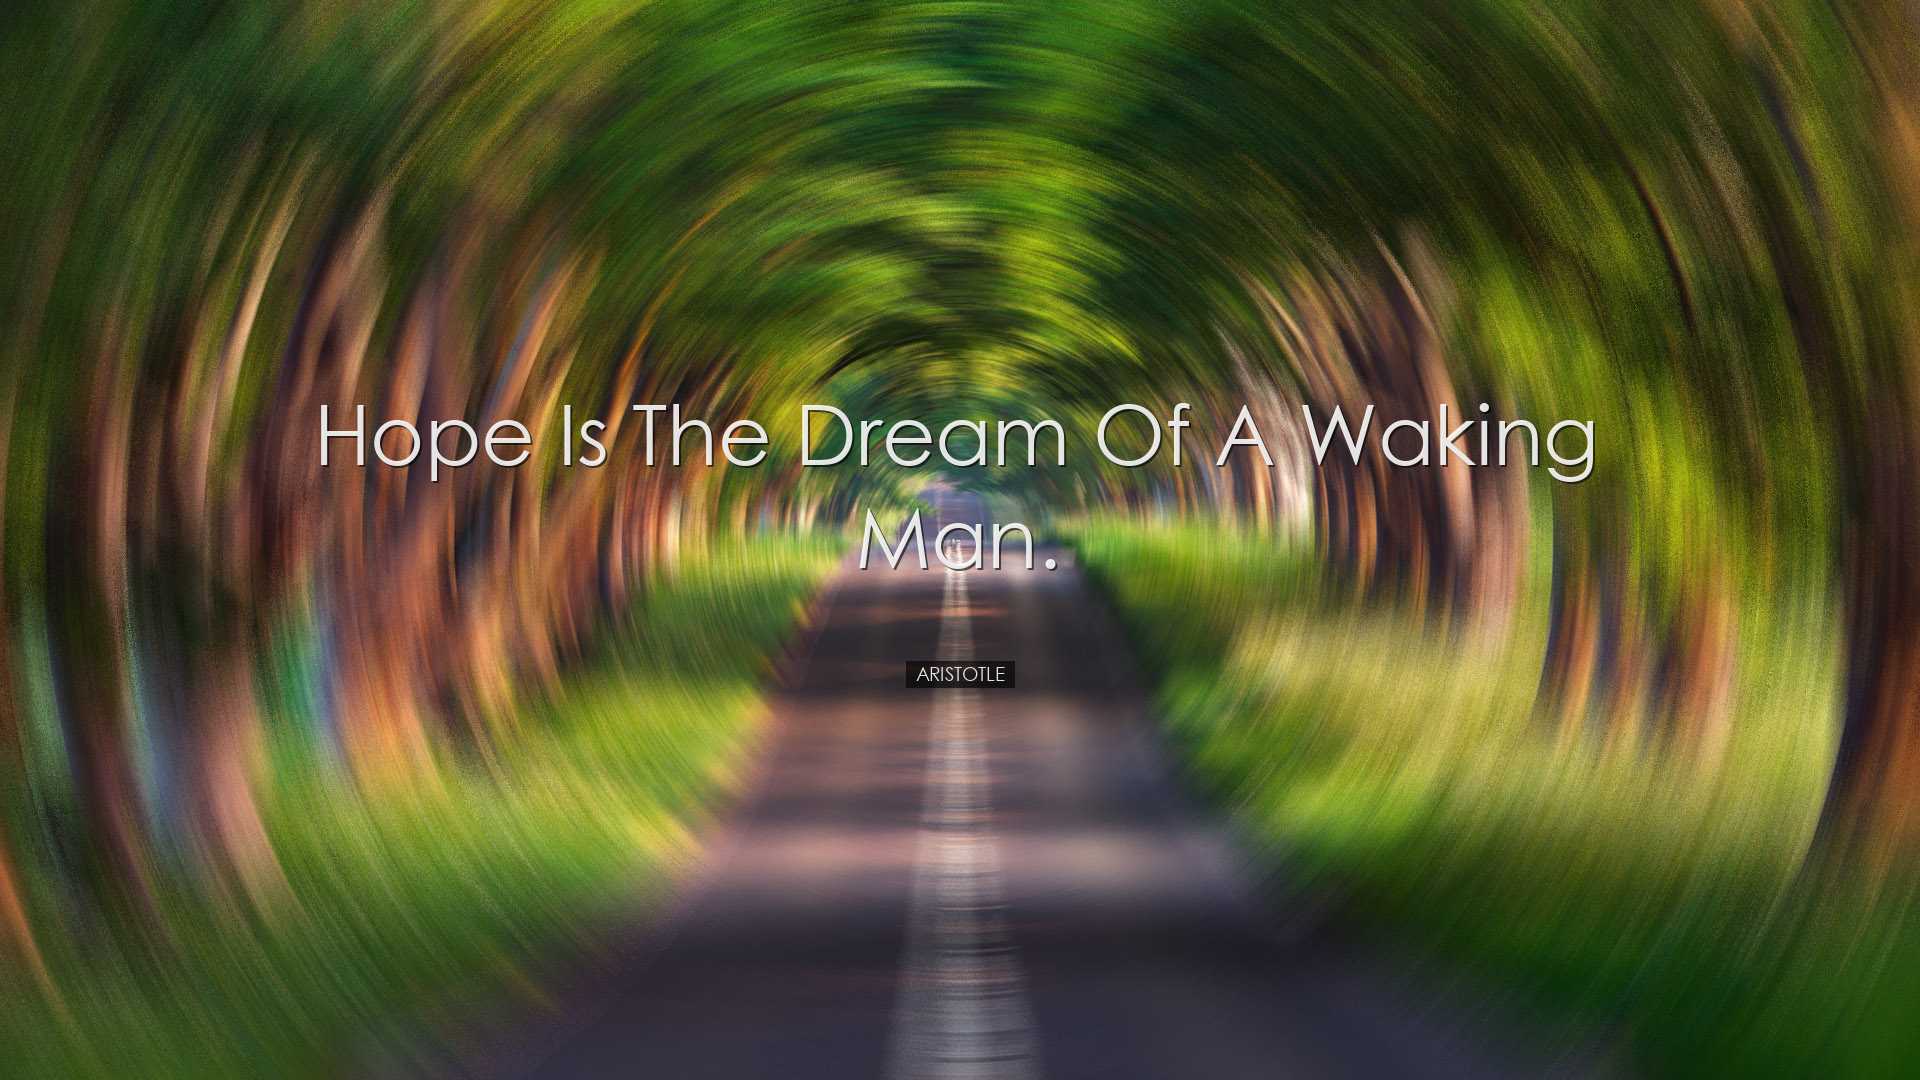 Hope is the dream of a waking man. - Aristotle